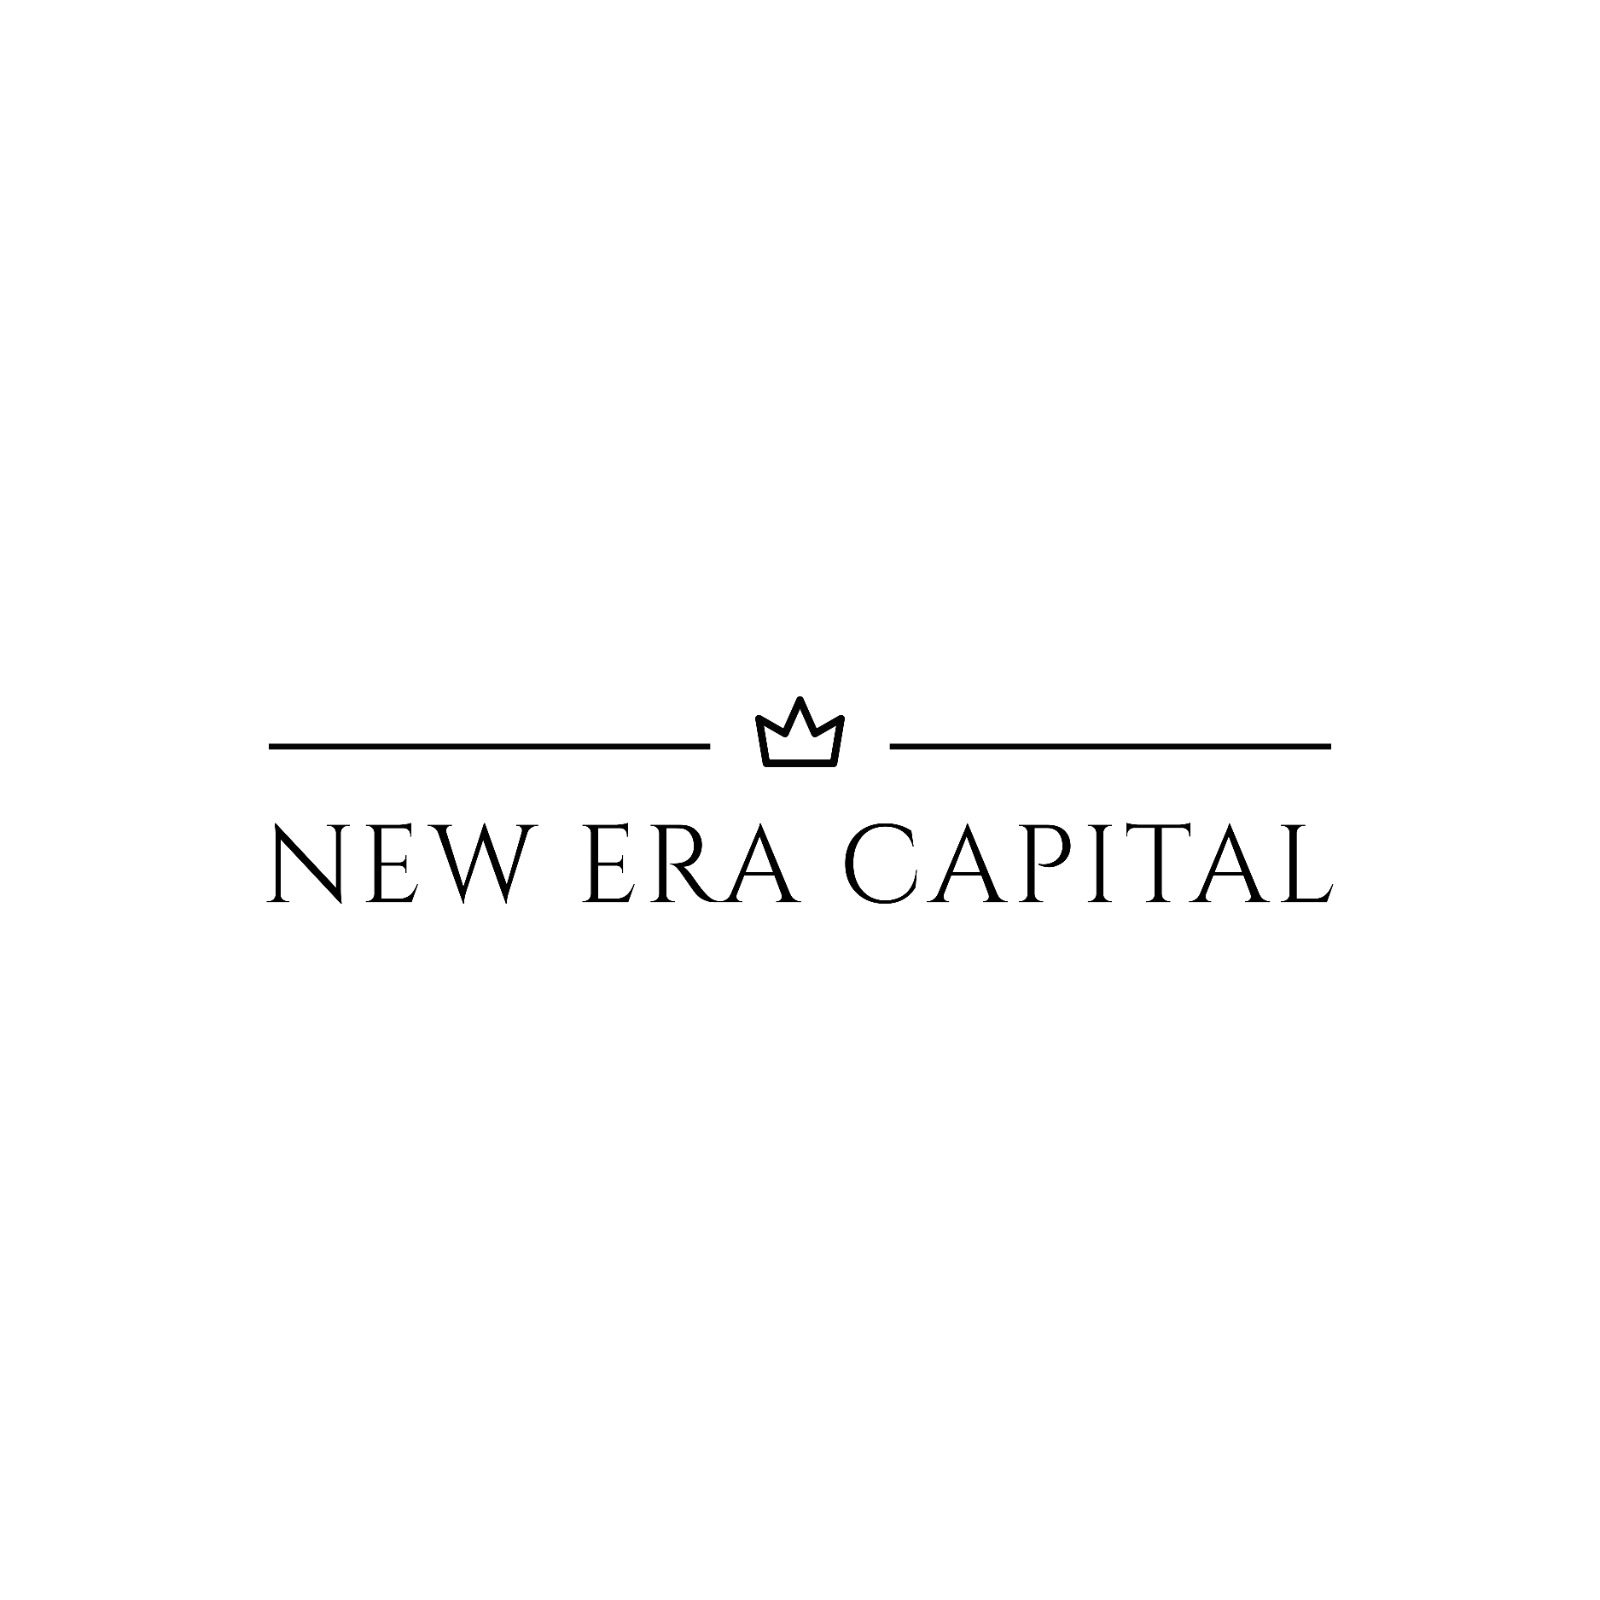 We received seed investment from New Era Capital.